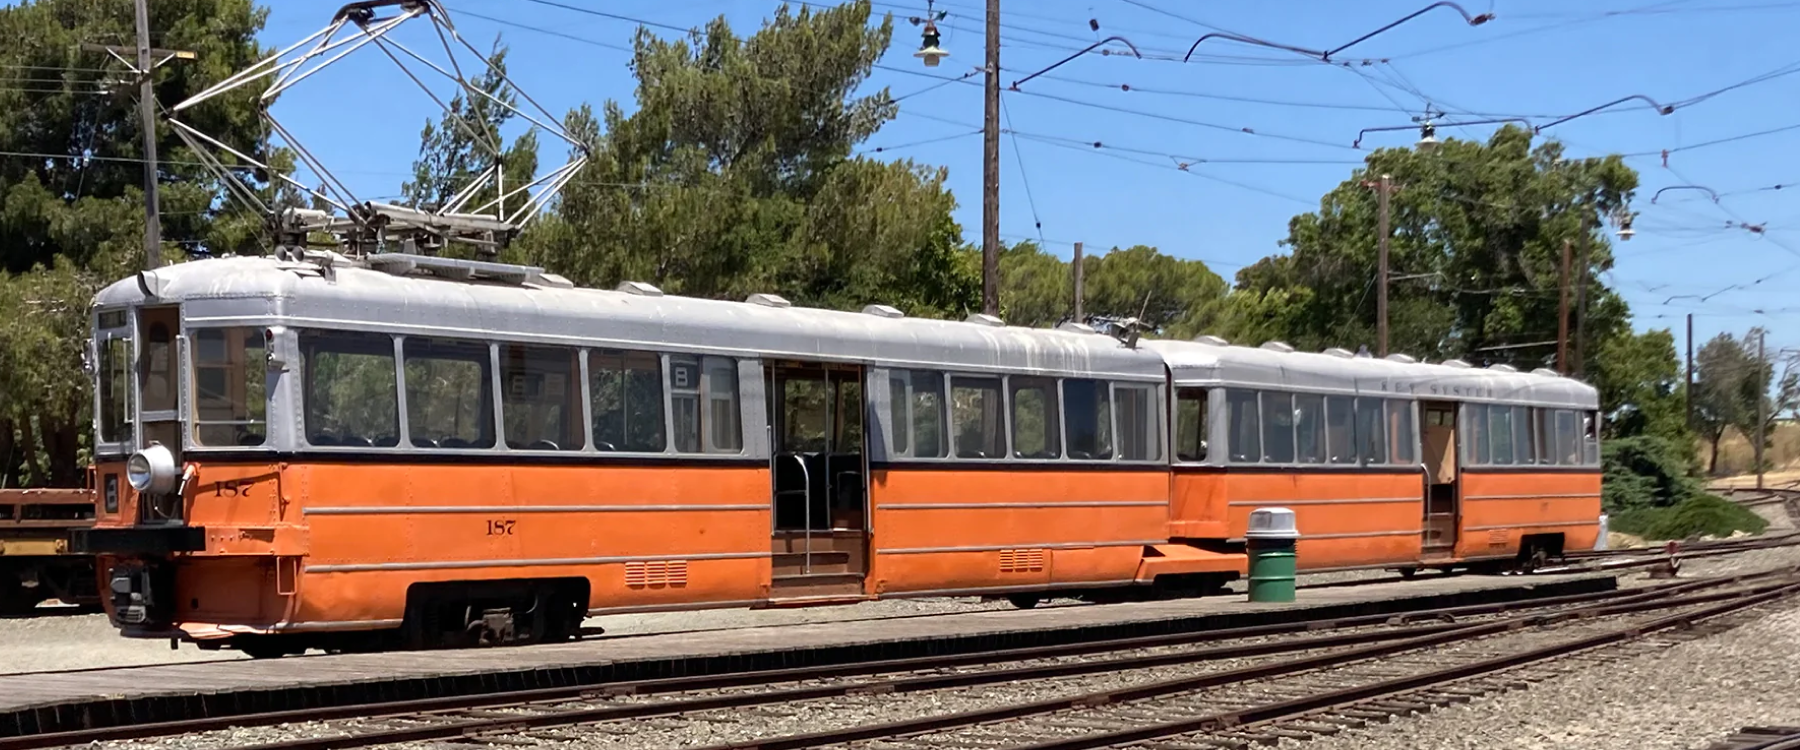 The Western Railway Museum in Suisun City offers rides aboard a restored Key System streetcar.